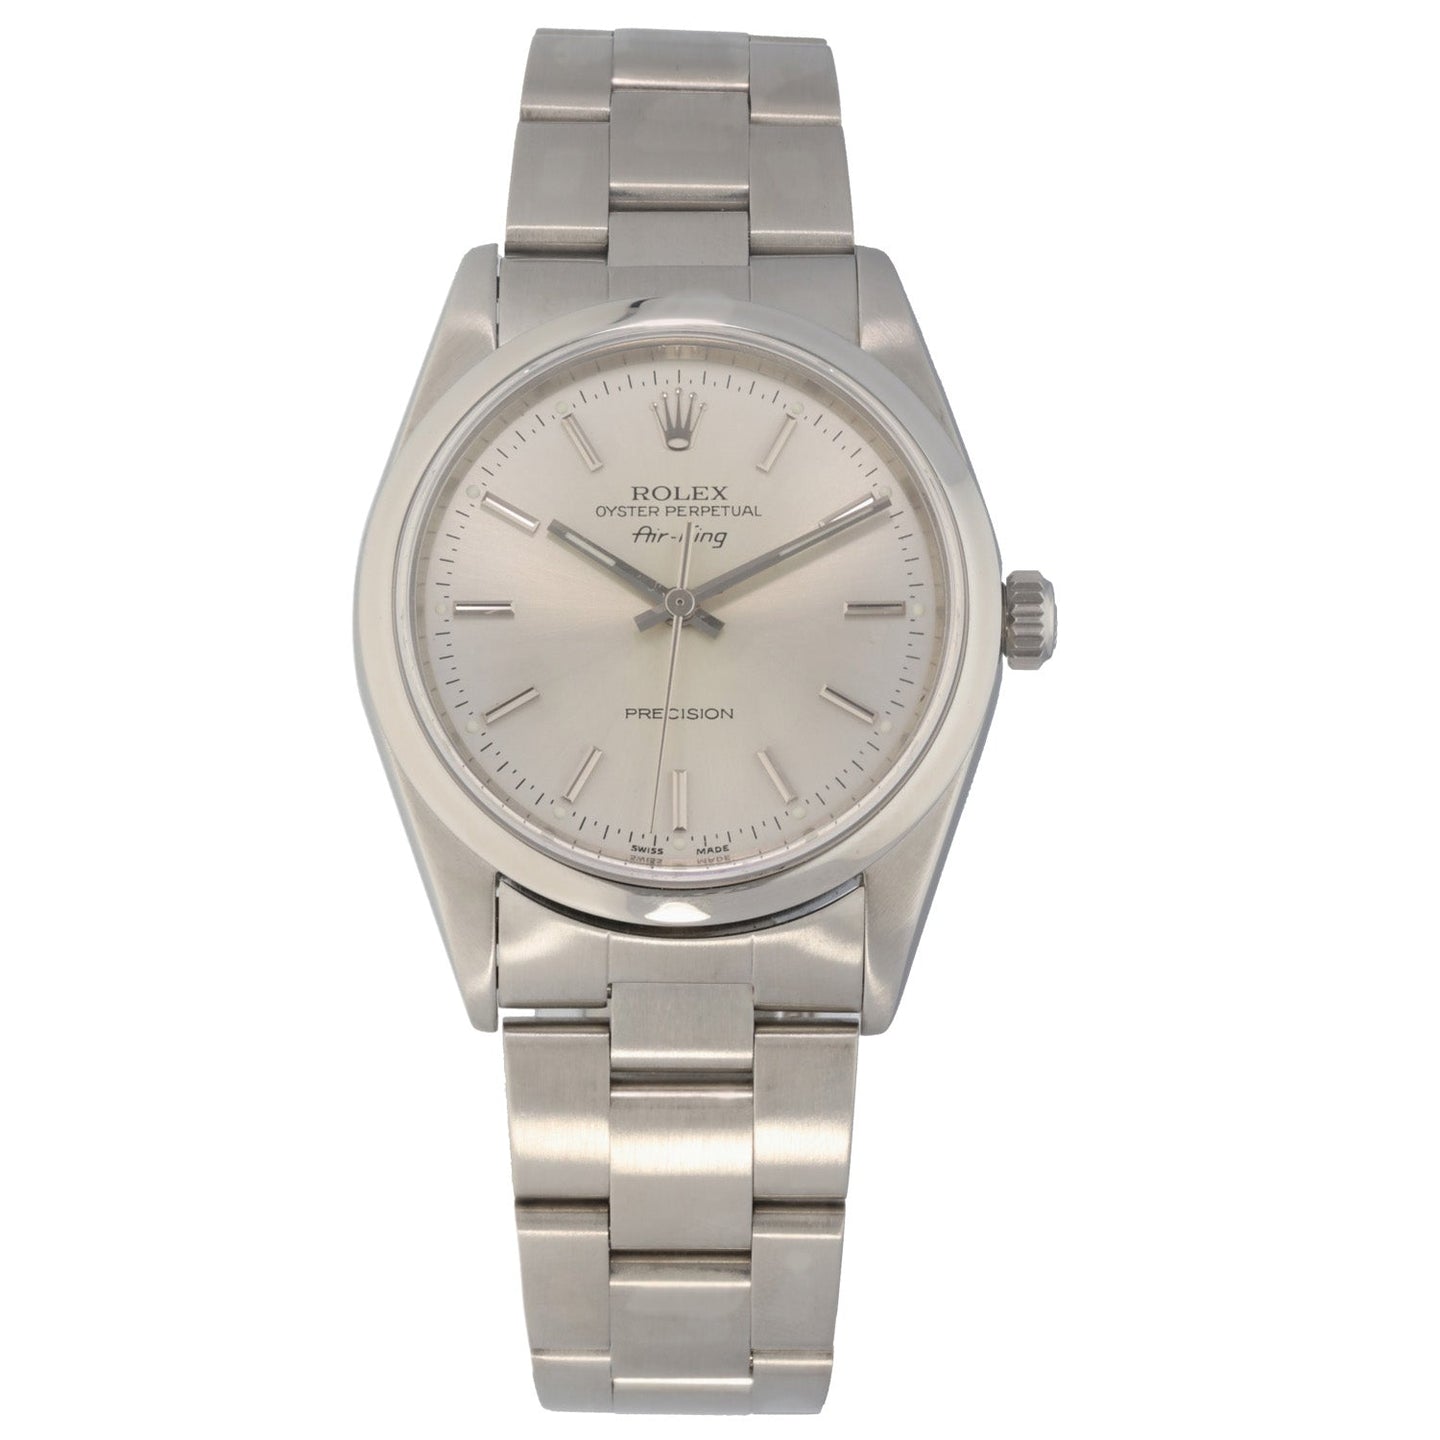 Rolex Air King 14000M 34mm Stainless Steel Watch